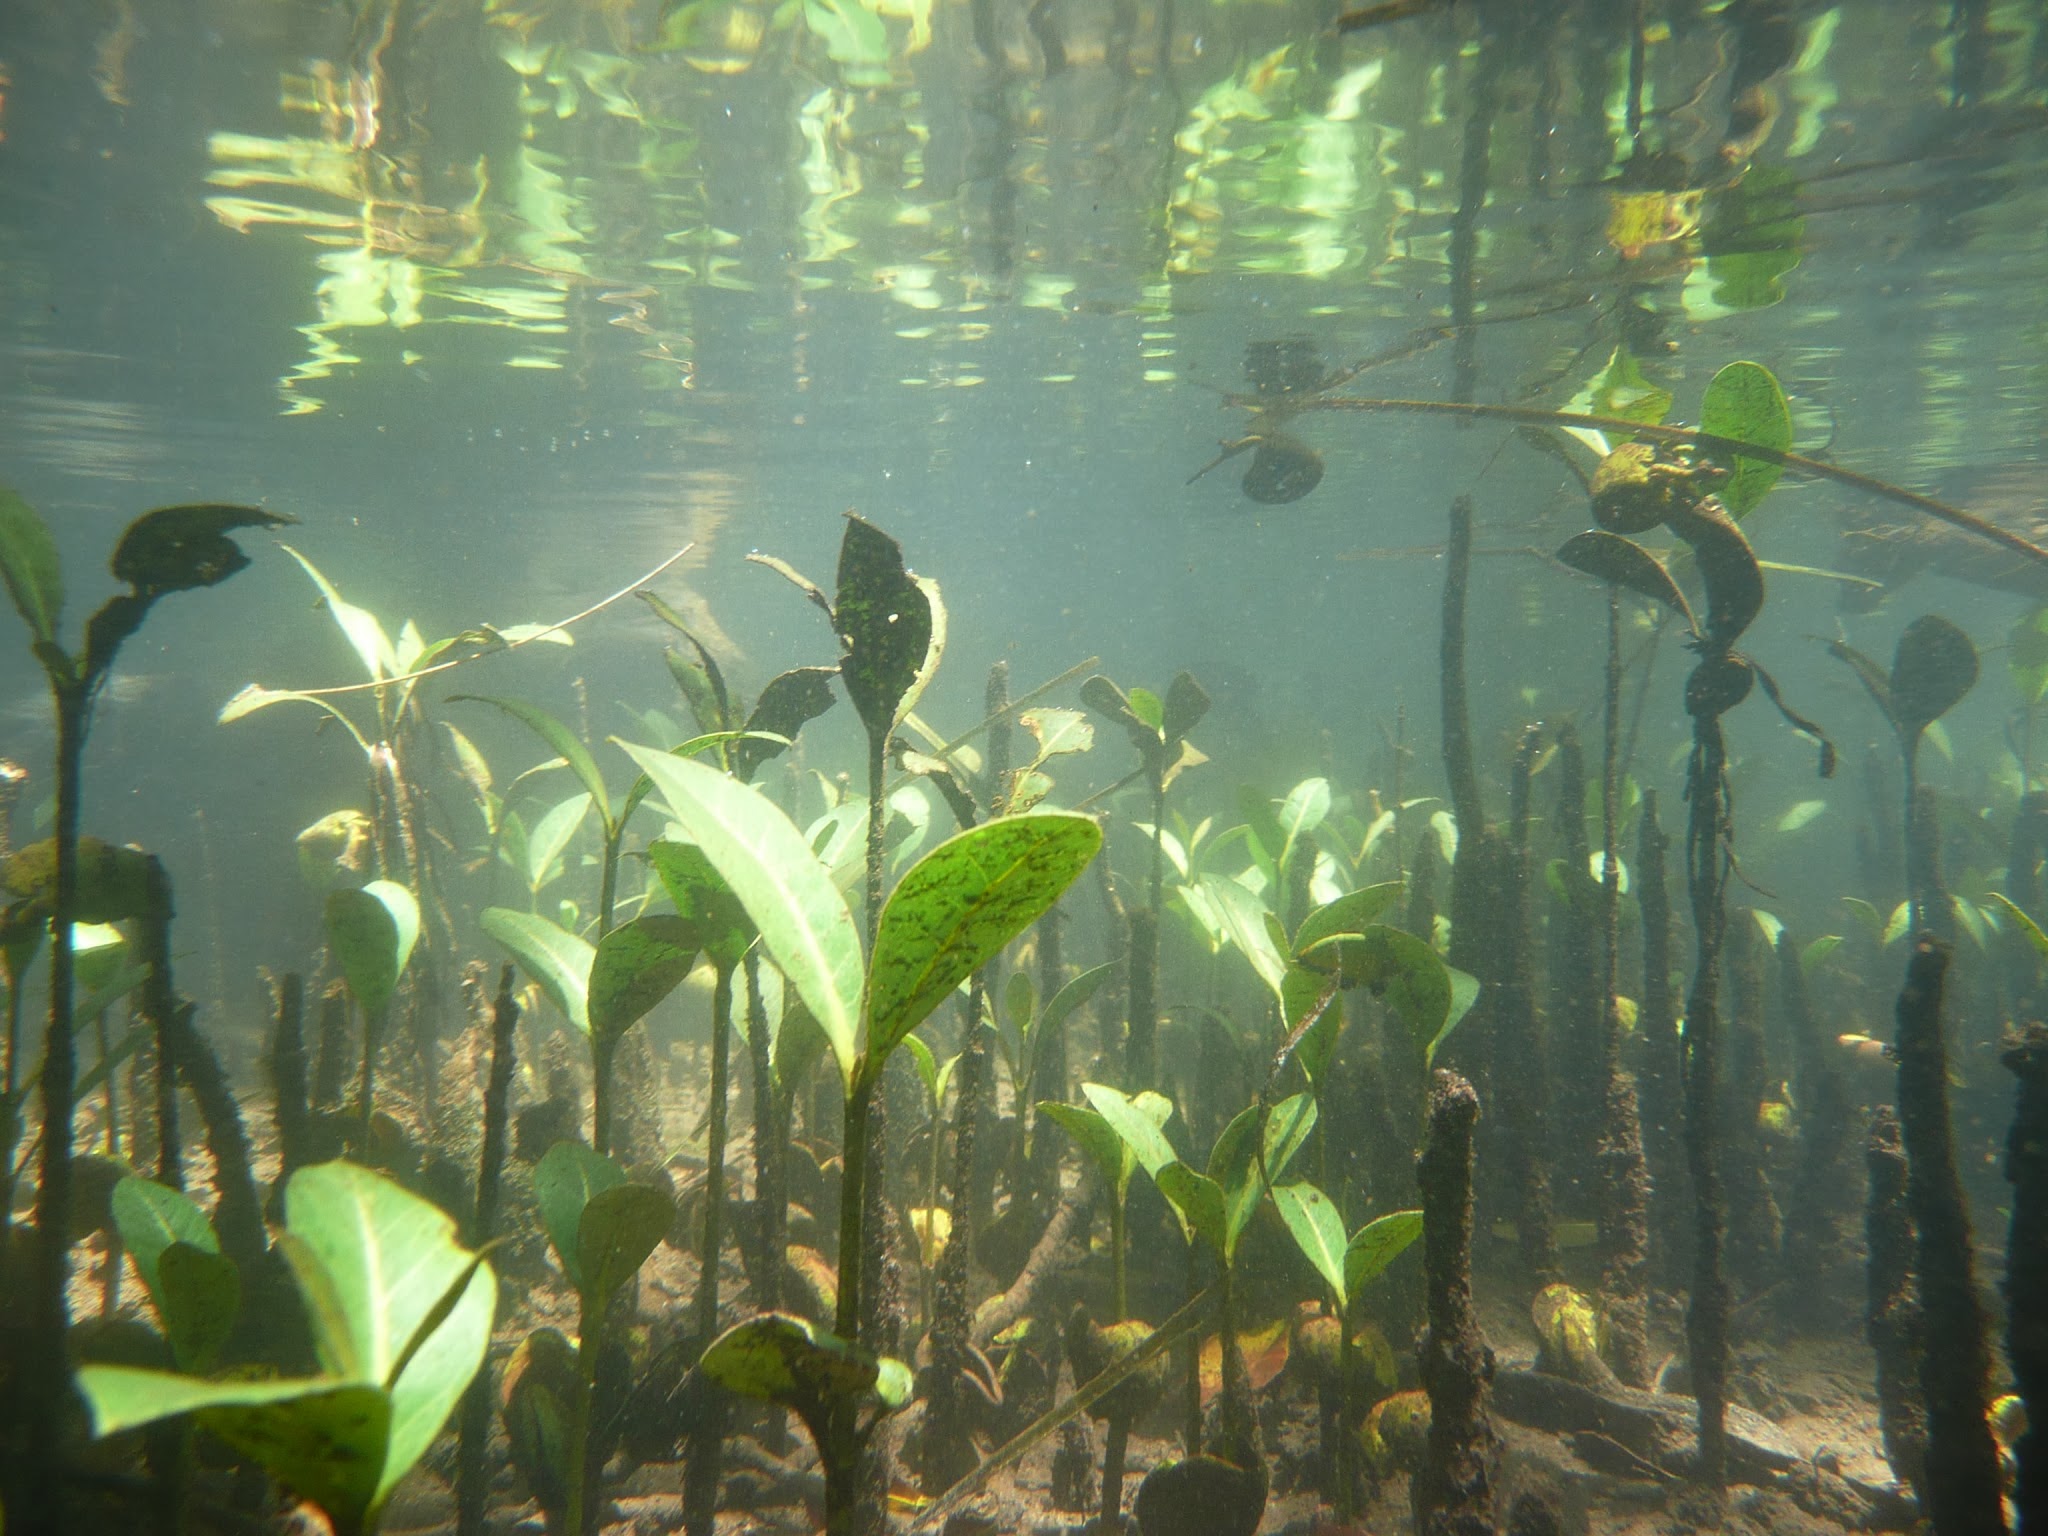 Underwater view of small mangrove plants that are close together so providing safe places for small animals to live safely.